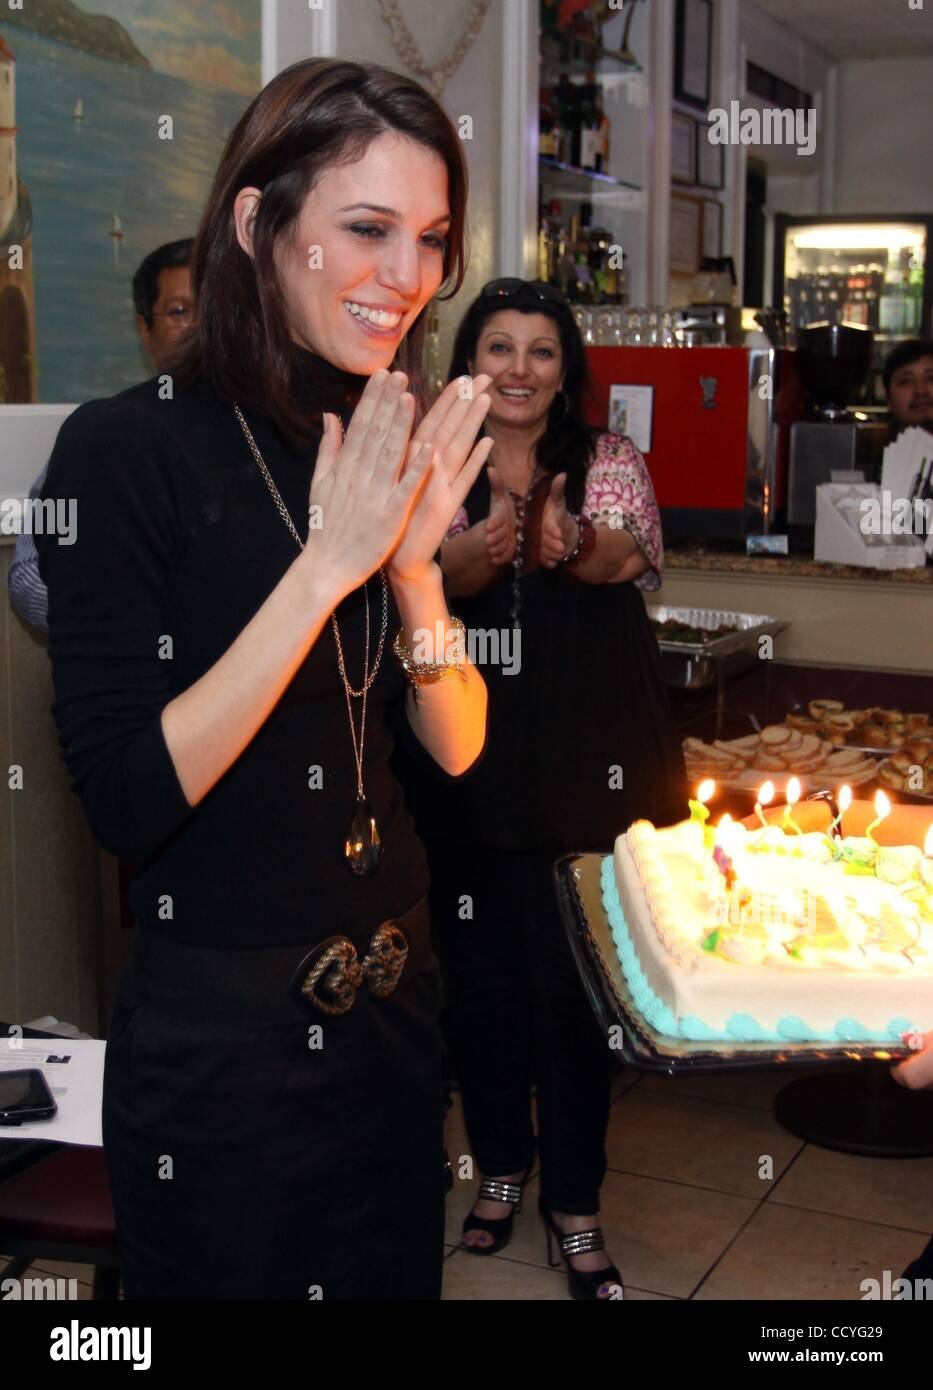 Mar 19, 2010 - New Haven, Connecticut, USA - Actress and singer CHRISTY CARLSON ROMANO celebrated the night before her 26th birthday at Anastasio's Restaurant on Wooster Street. Romano was there with family for dinner and to support family friend and entertainer Nick Apollo Forte who has a new song  Stock Photo